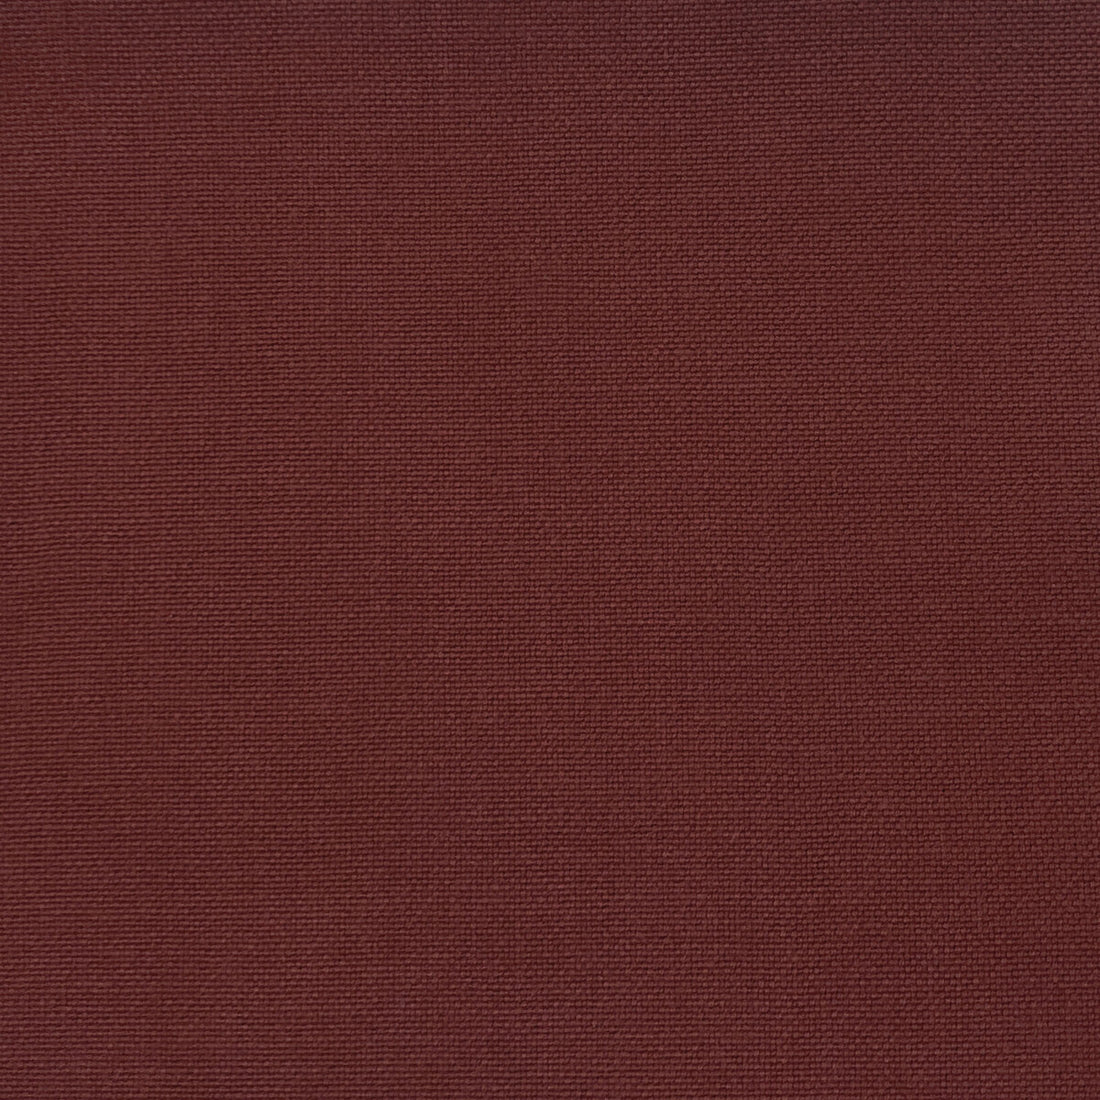 Palma fabric in vino color - pattern GDT5688.025.0 - by Gaston y Daniela in the Gaston Maiorica collection